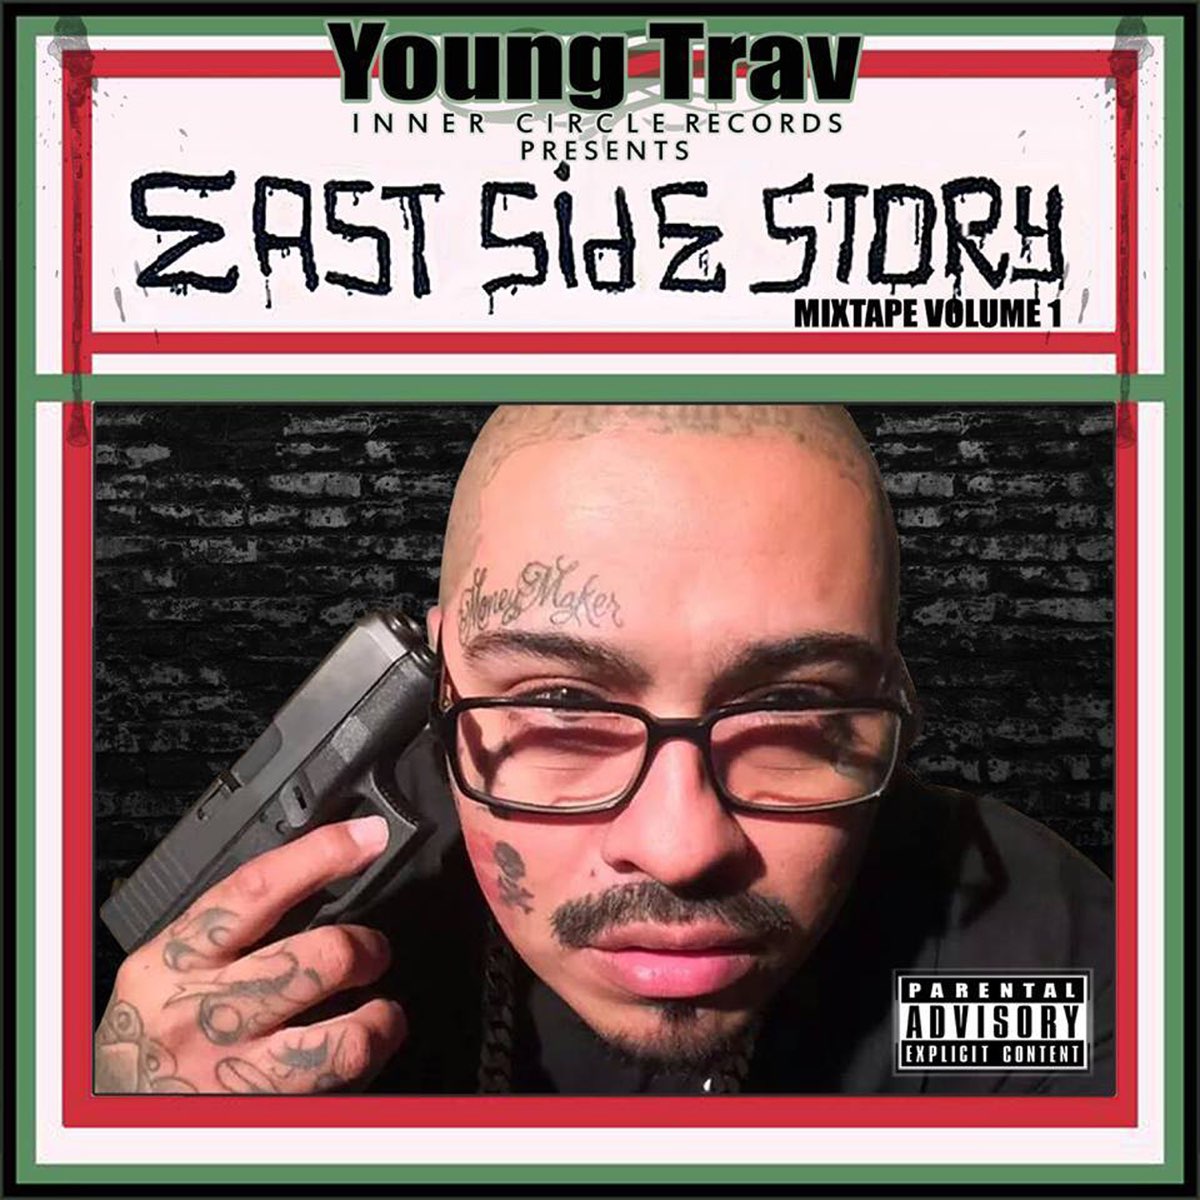 Young Trav - East Side Story